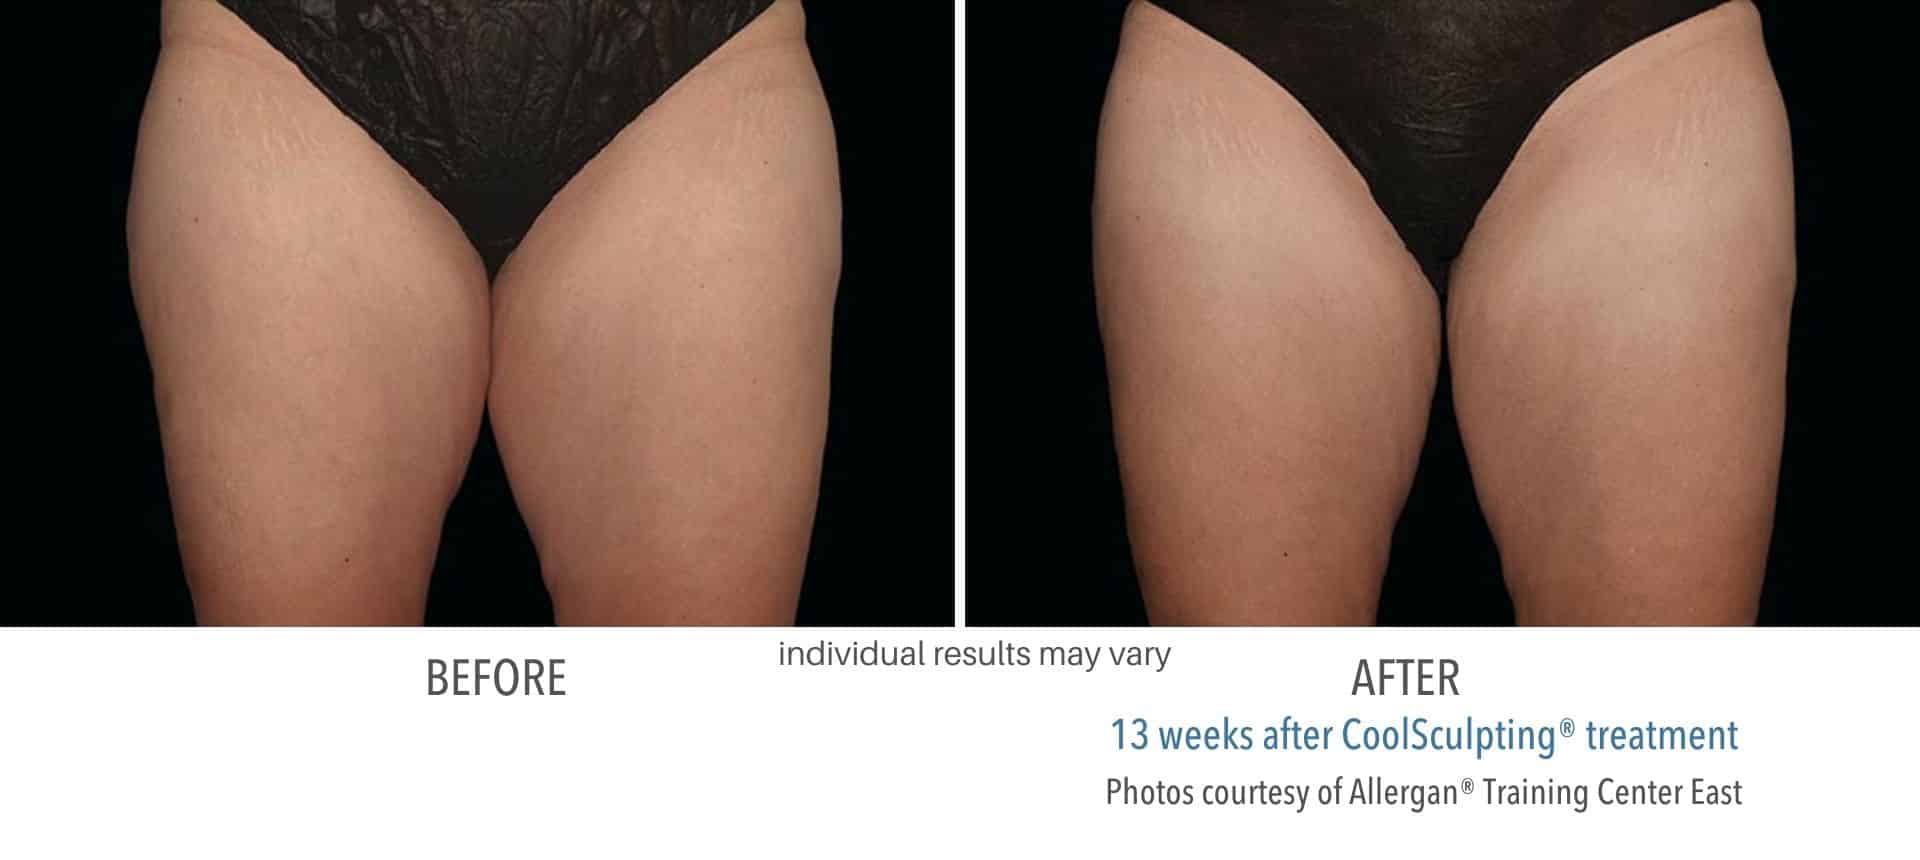 Striving for a Thigh Gap? How CoolSculpting Can Help - DaVinci Body  Sculpting